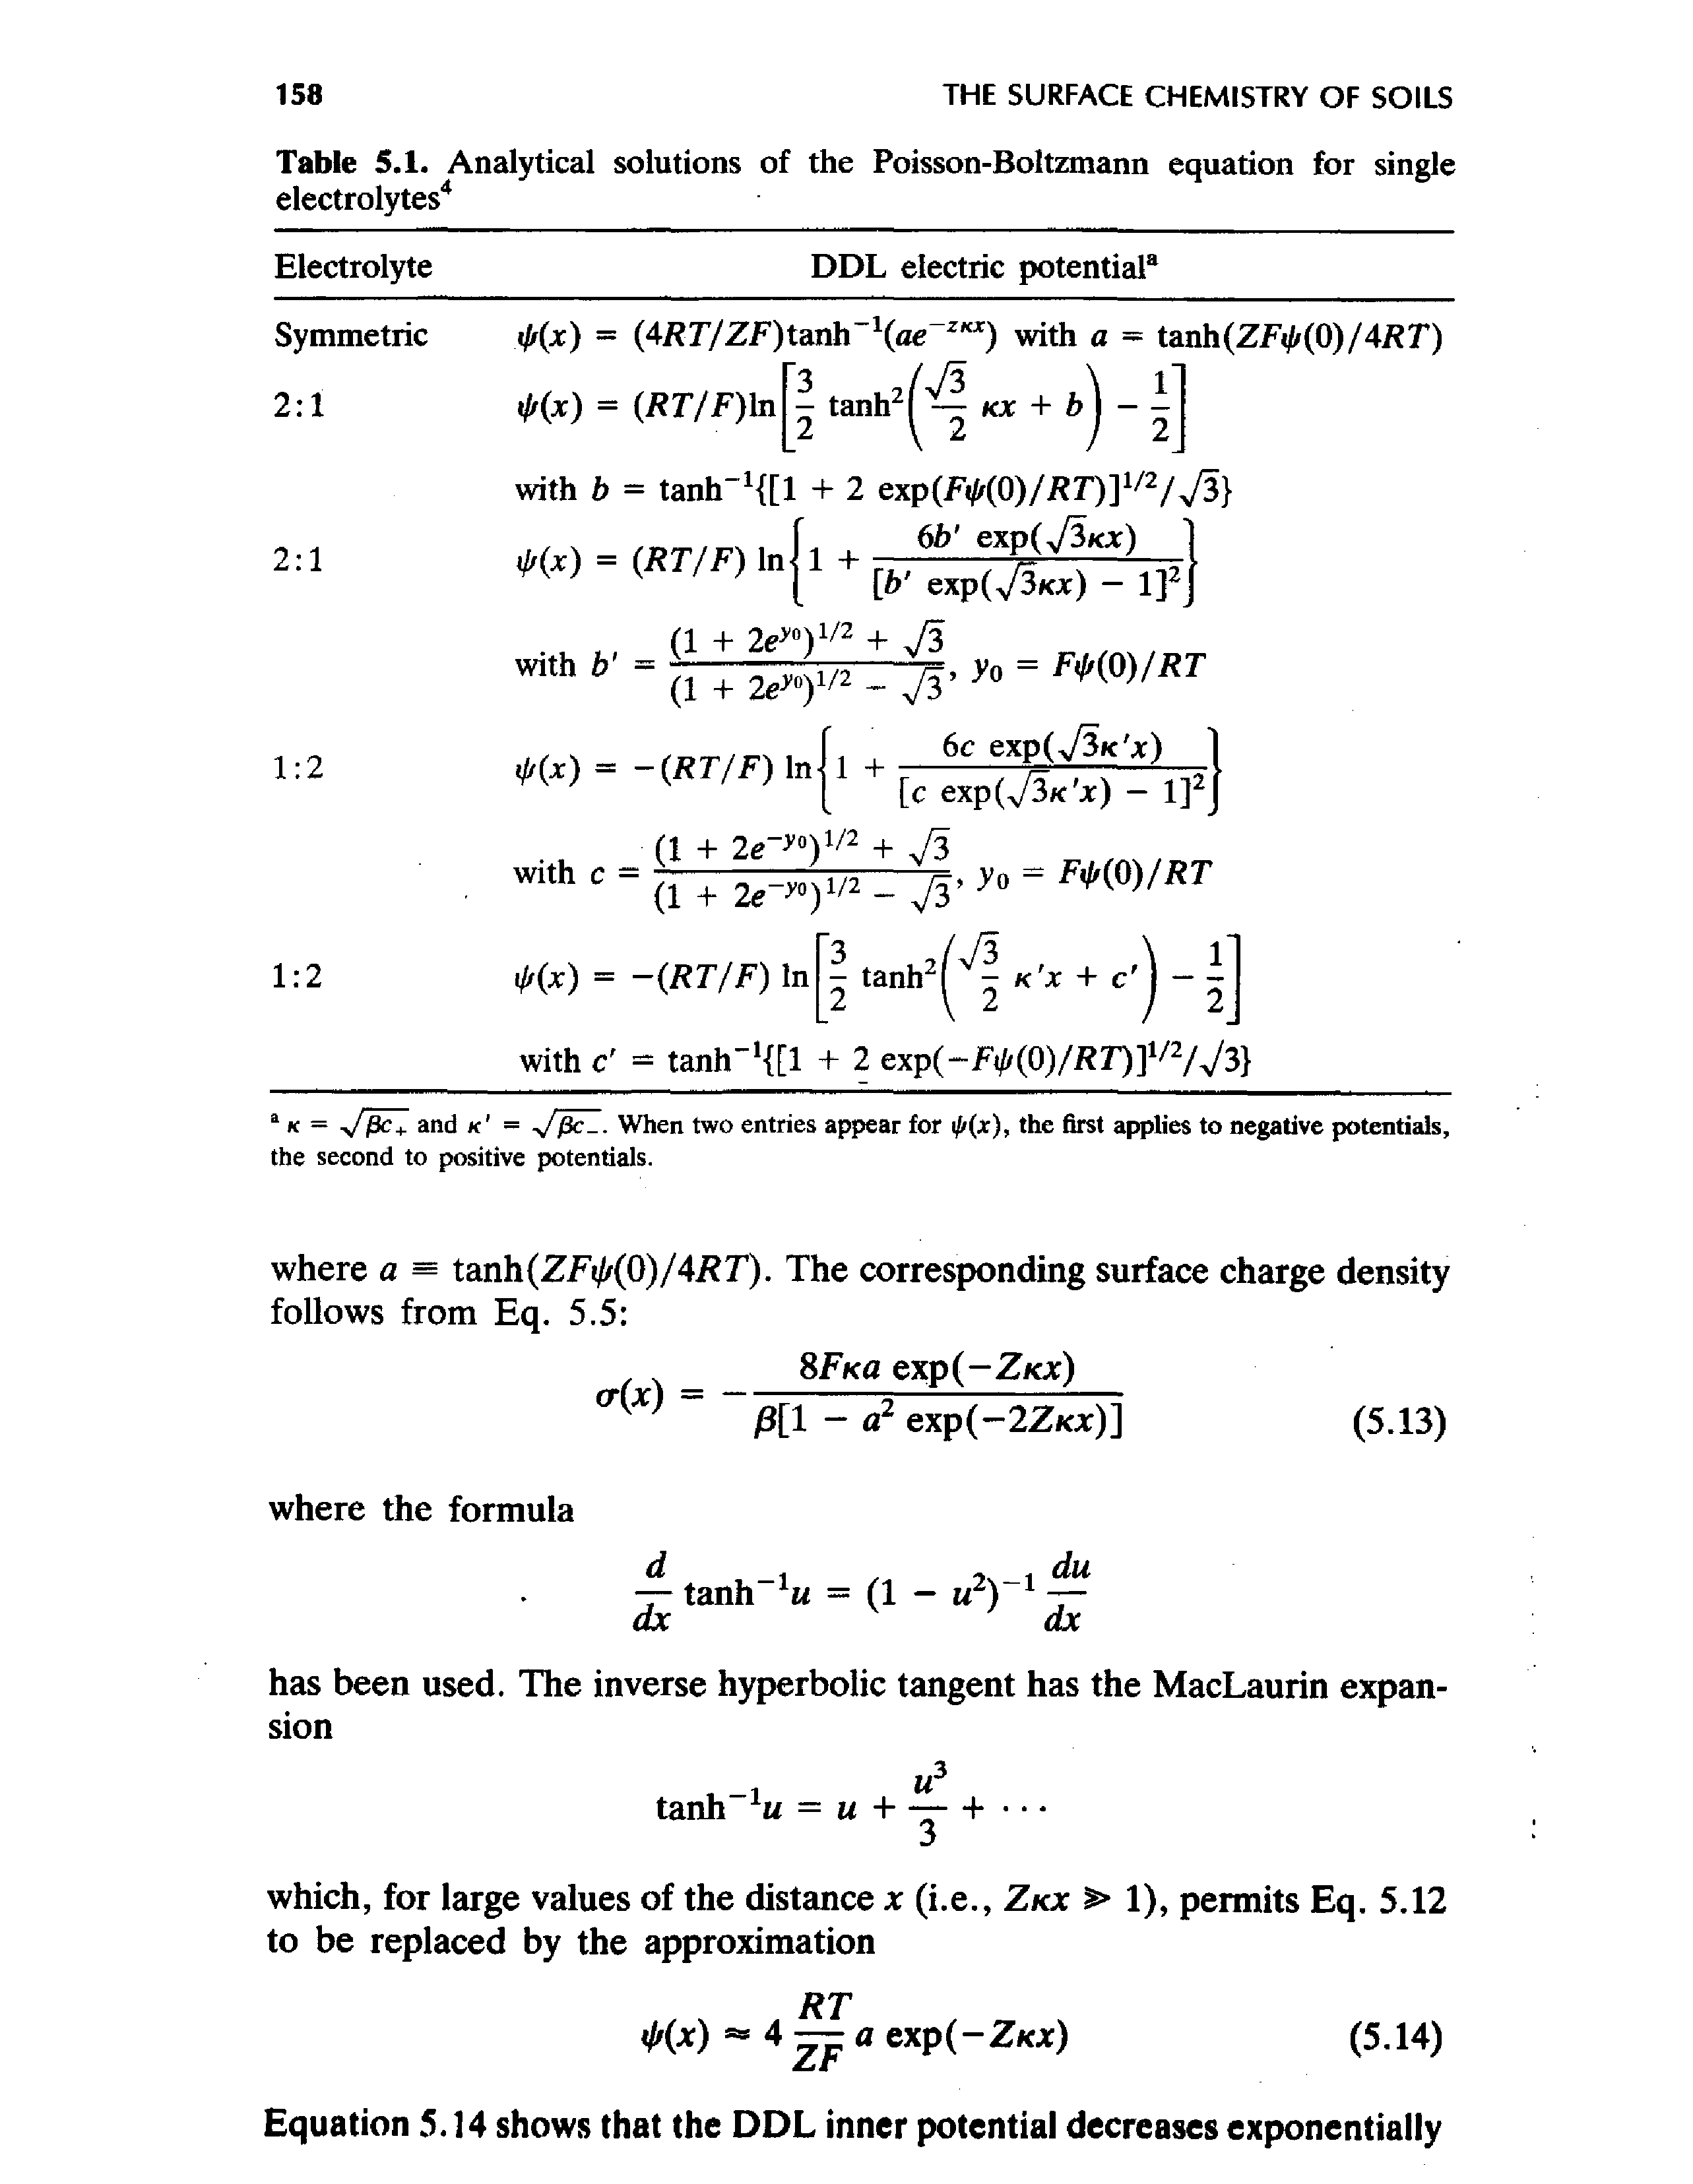 Table 5.1. Analytical solutions of the Poisson-Boltzmann equation for single electrolytes ...